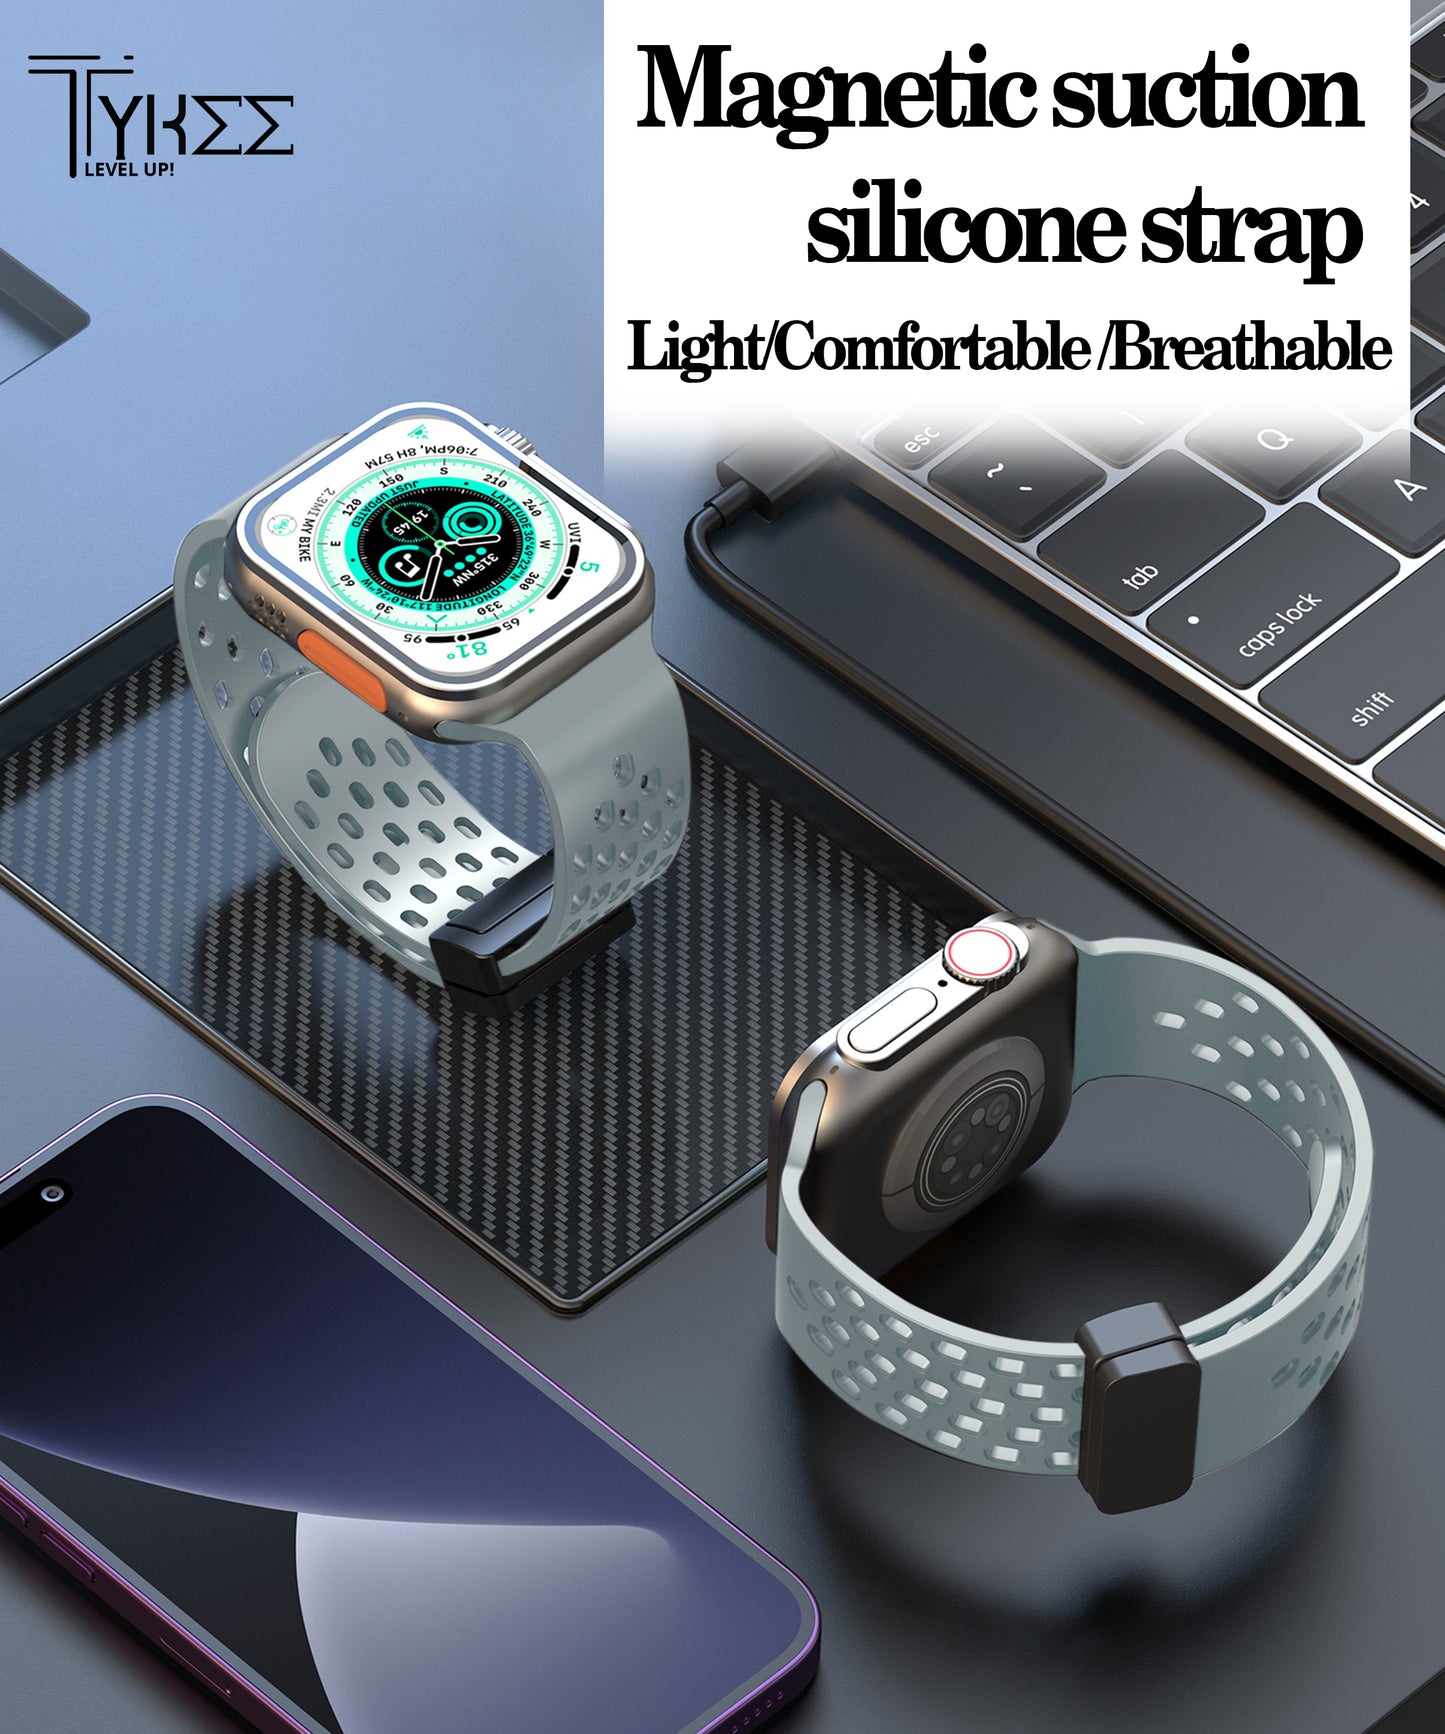 Sport Apple Watch Strap with Magnetic Buckle